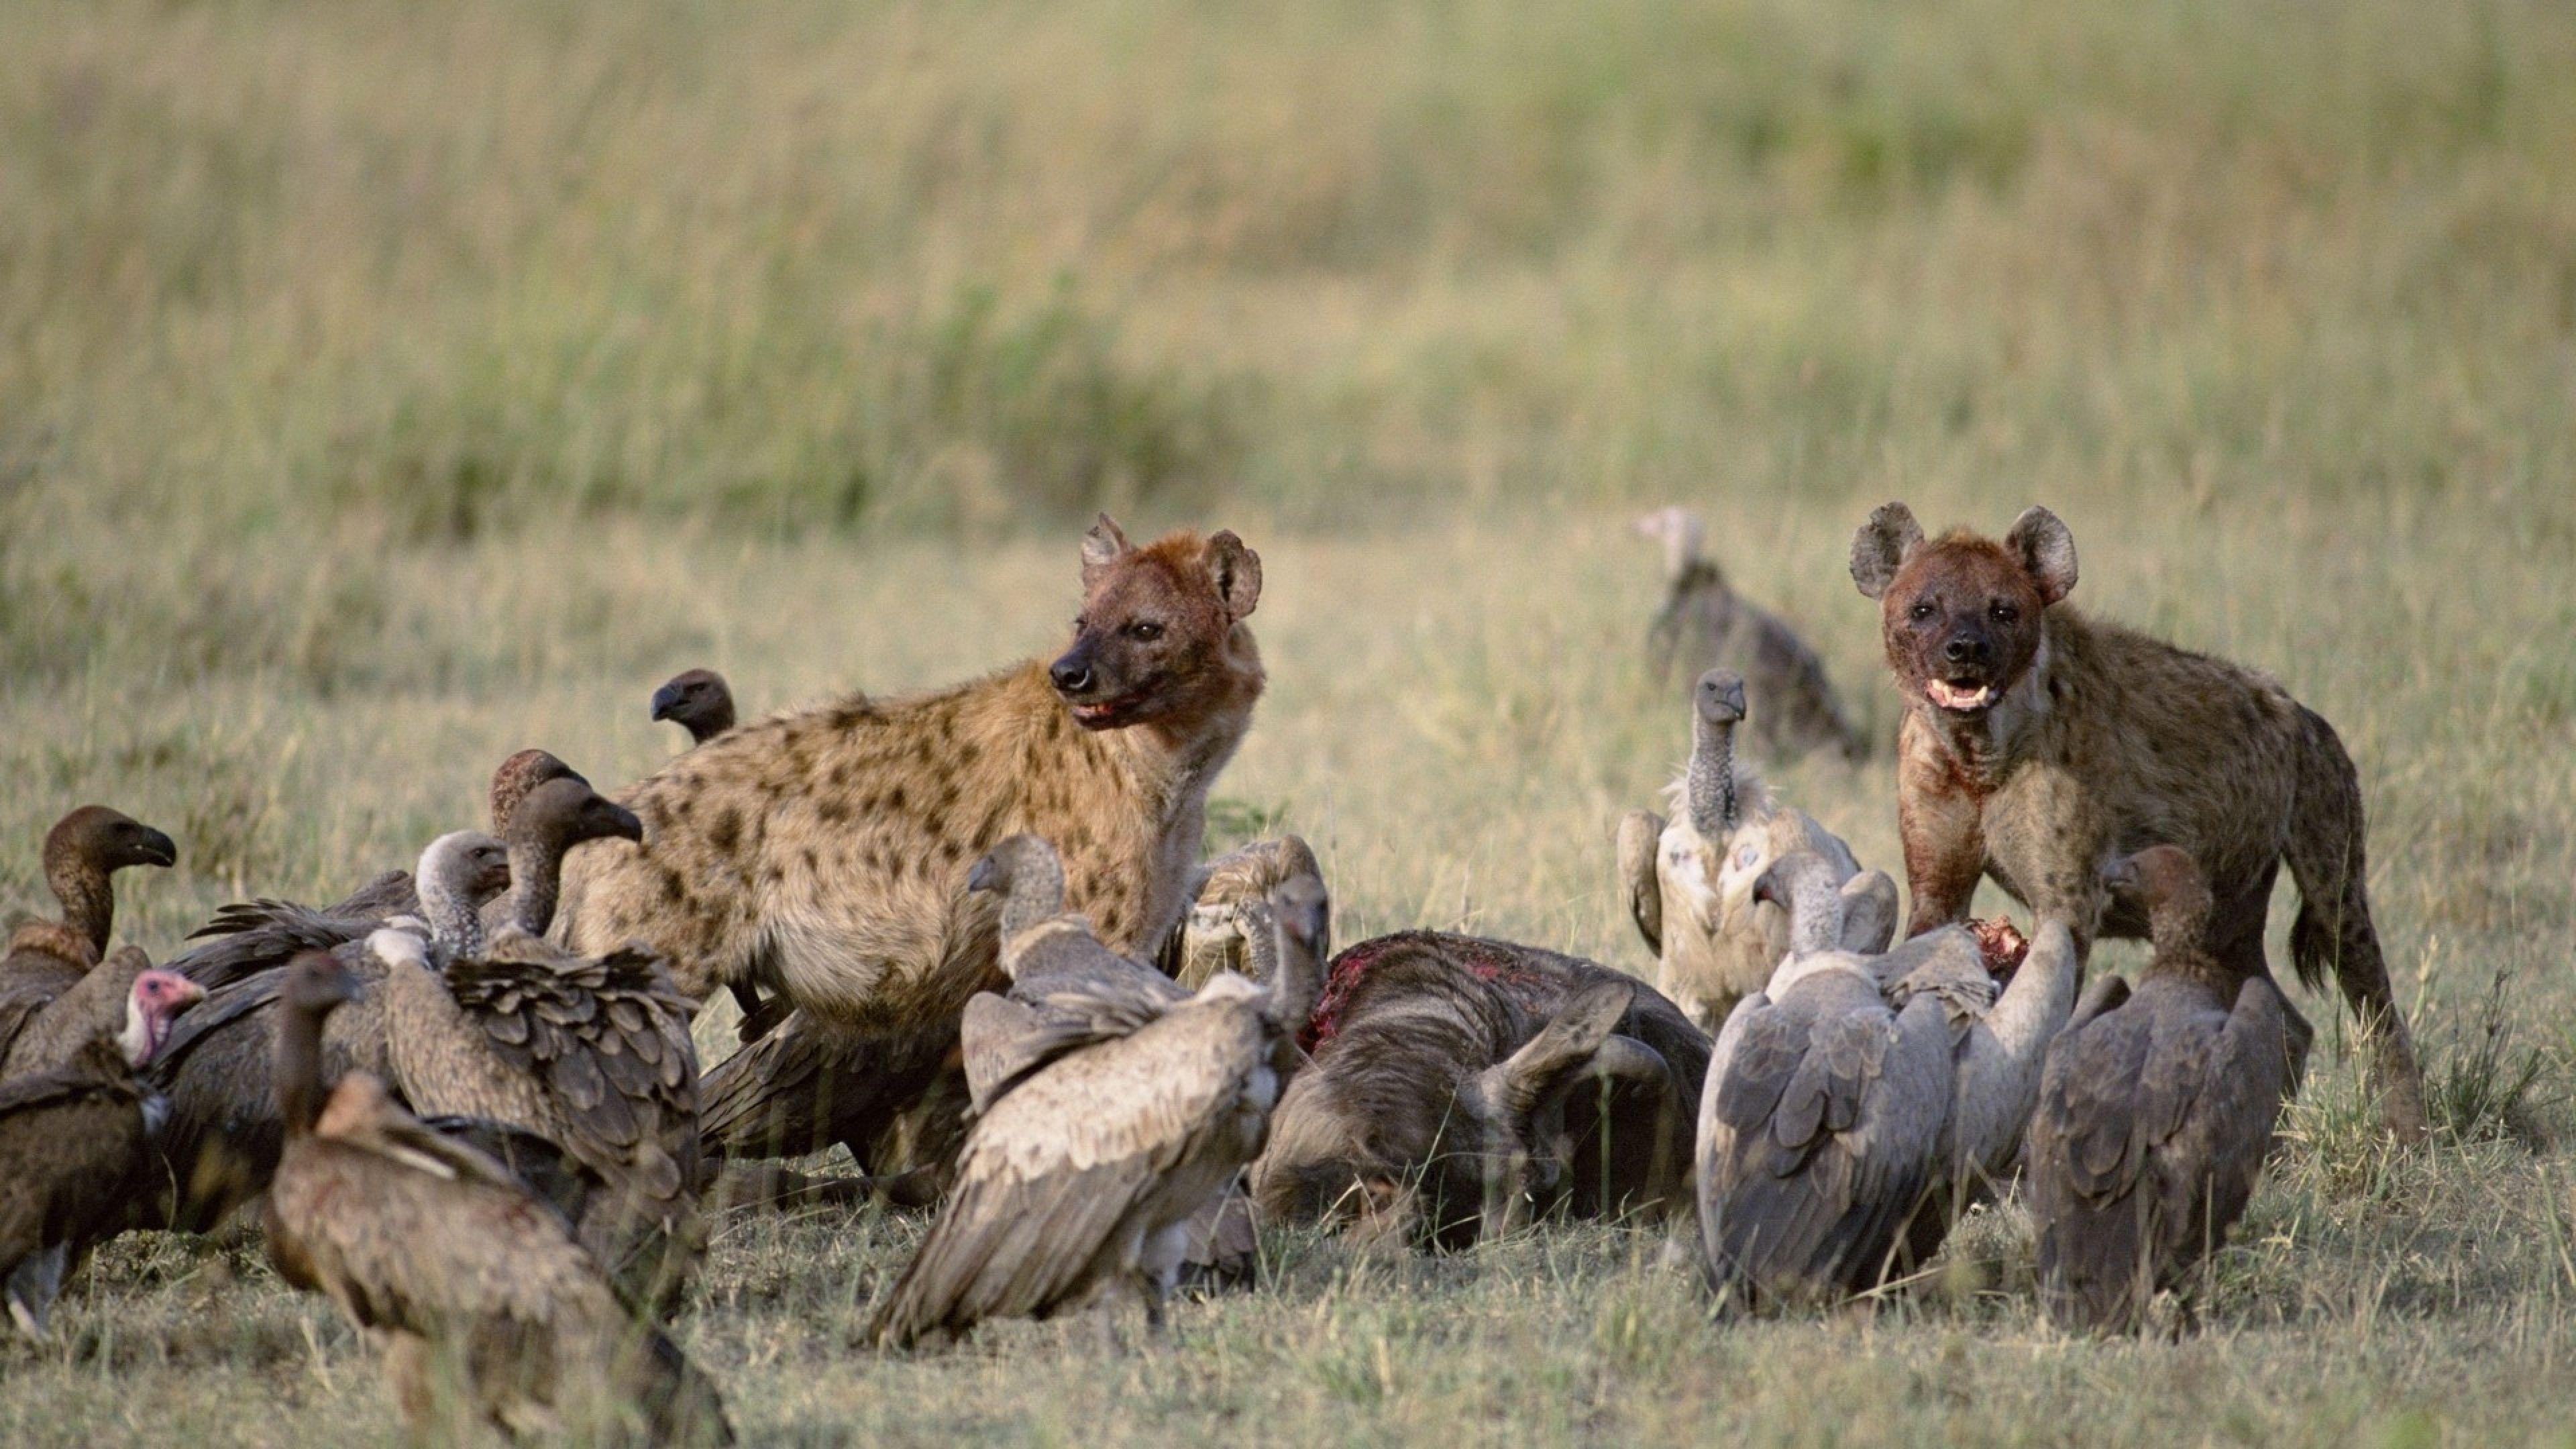 Download Wallpaper 3840x2160 Vultures, Hyenas, Carrion, Food